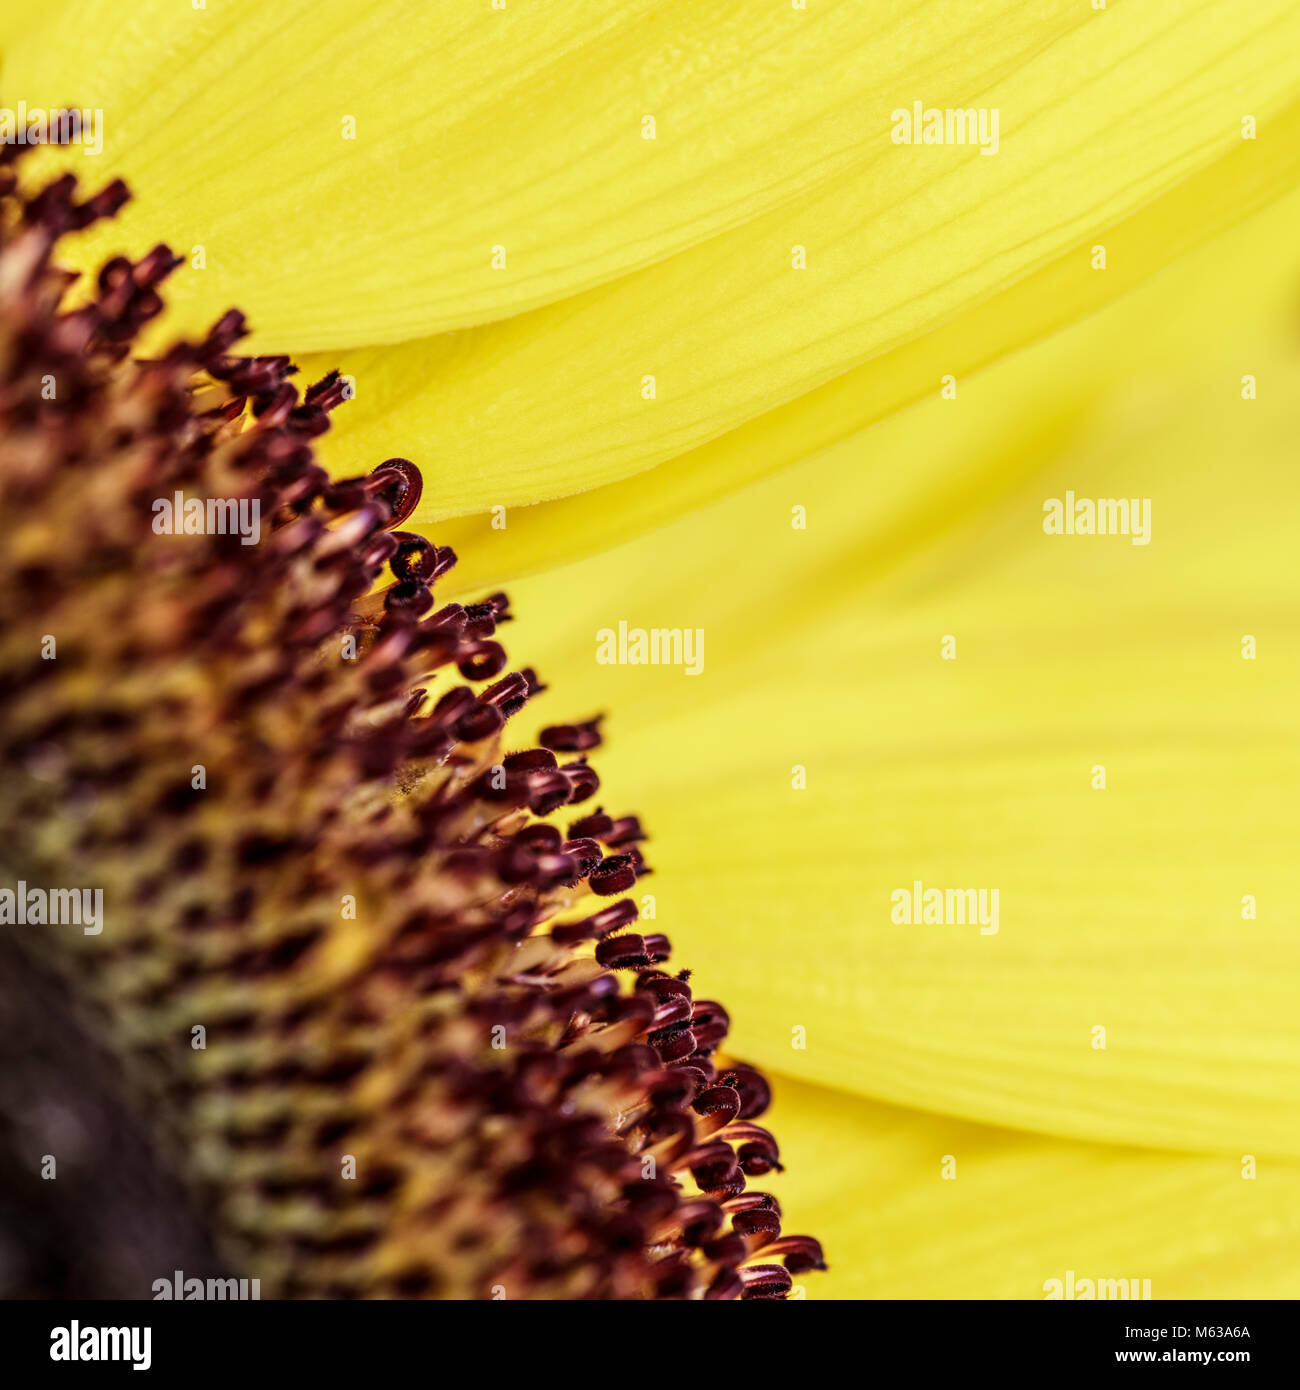 Close up of part of a sunflower showing the contrast between the soft yellow petals and the harder florets in the middle. Stock Photo